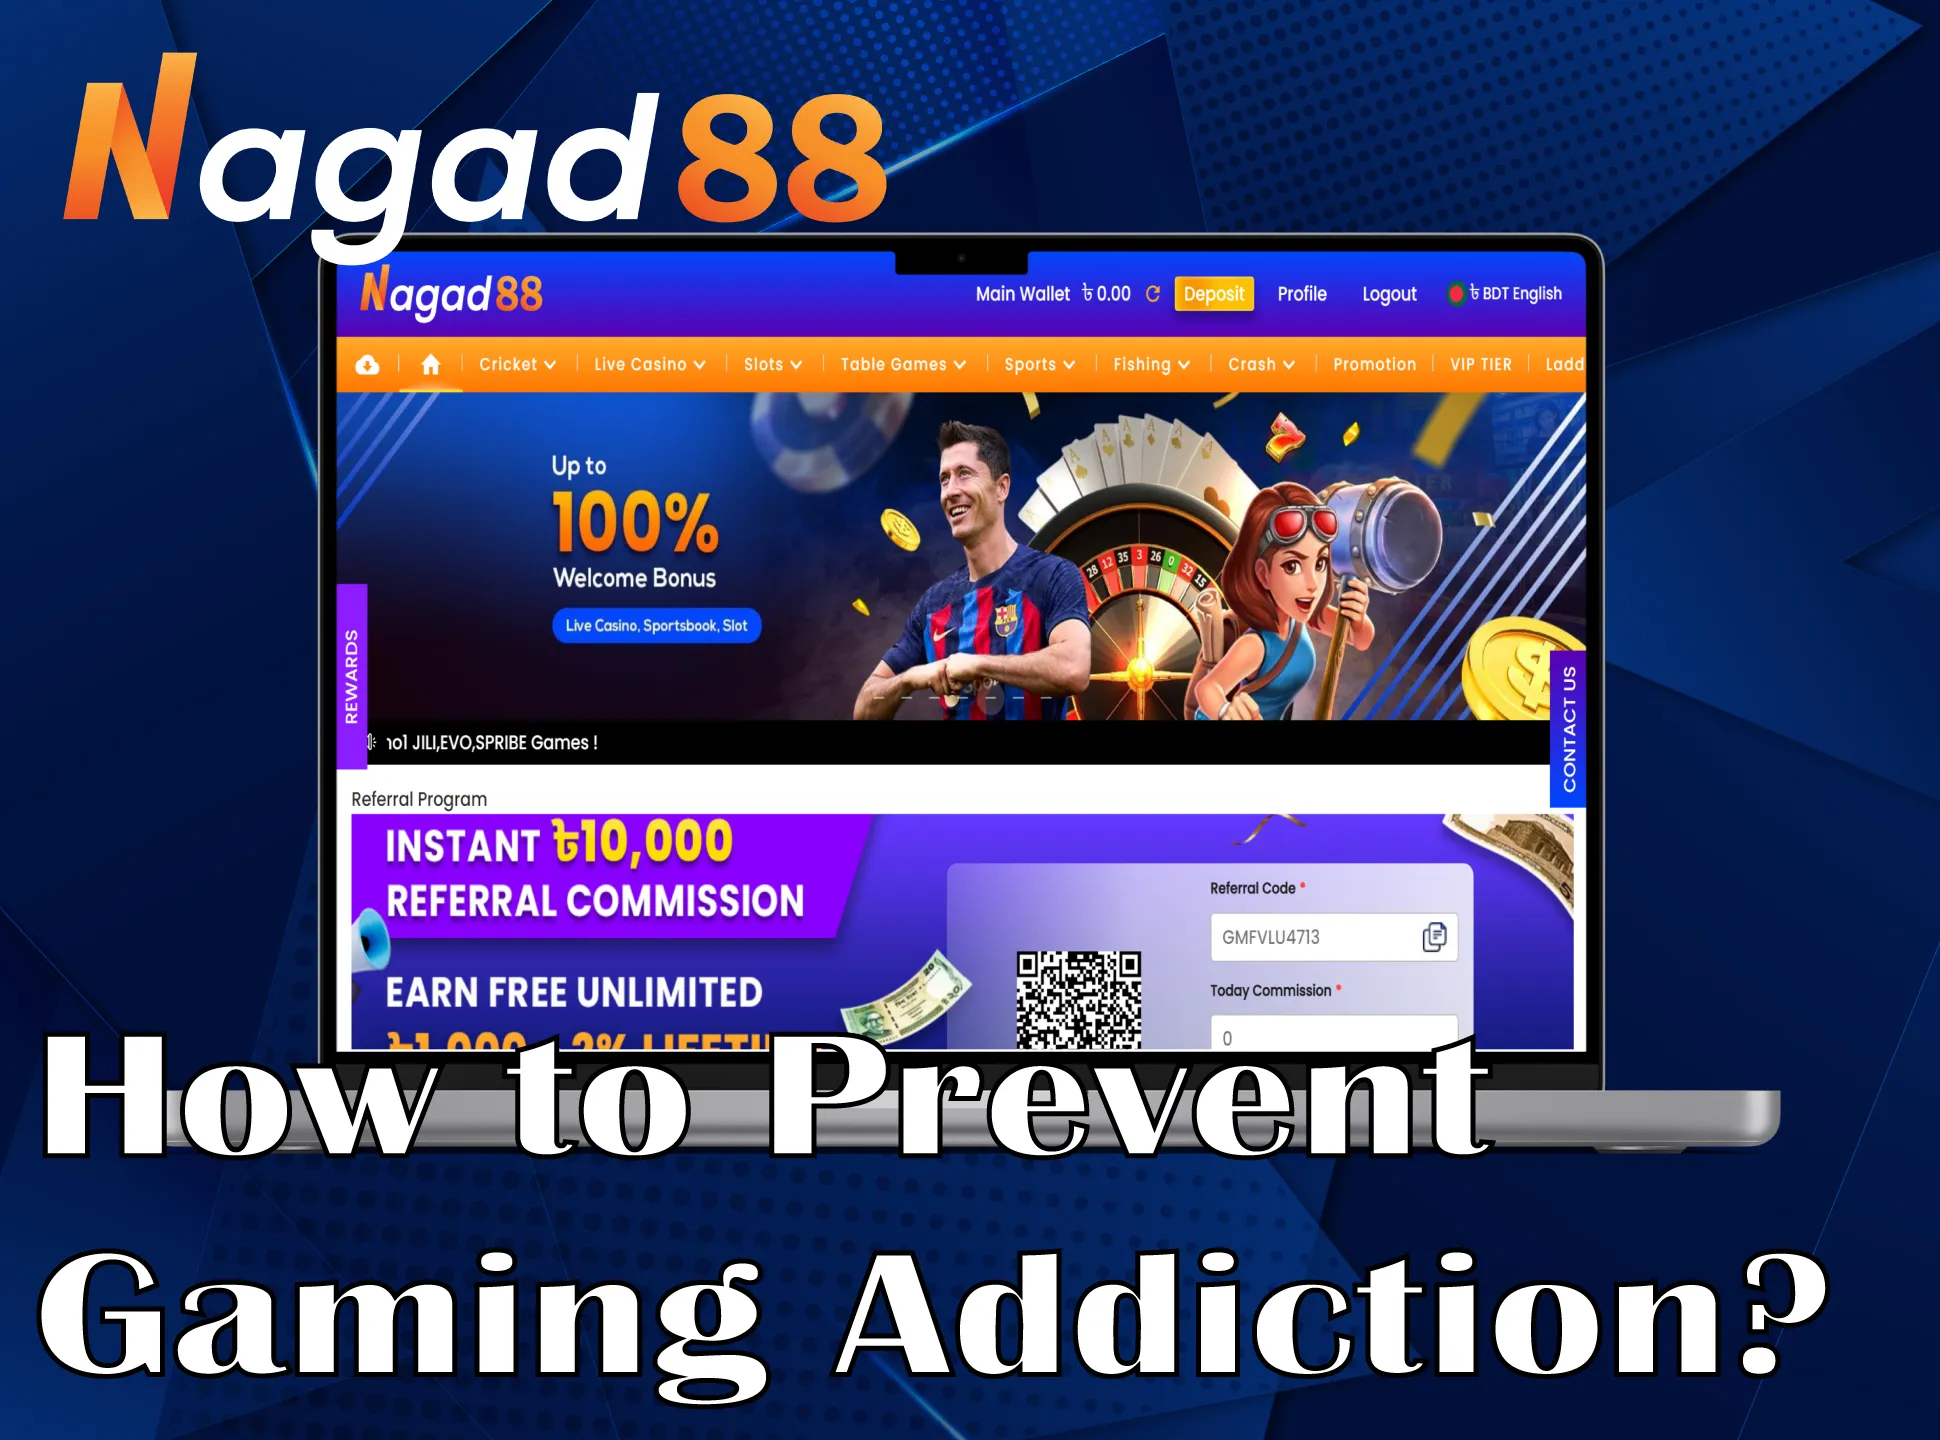 Nagad88's tips on how to prevent gaming addiction.